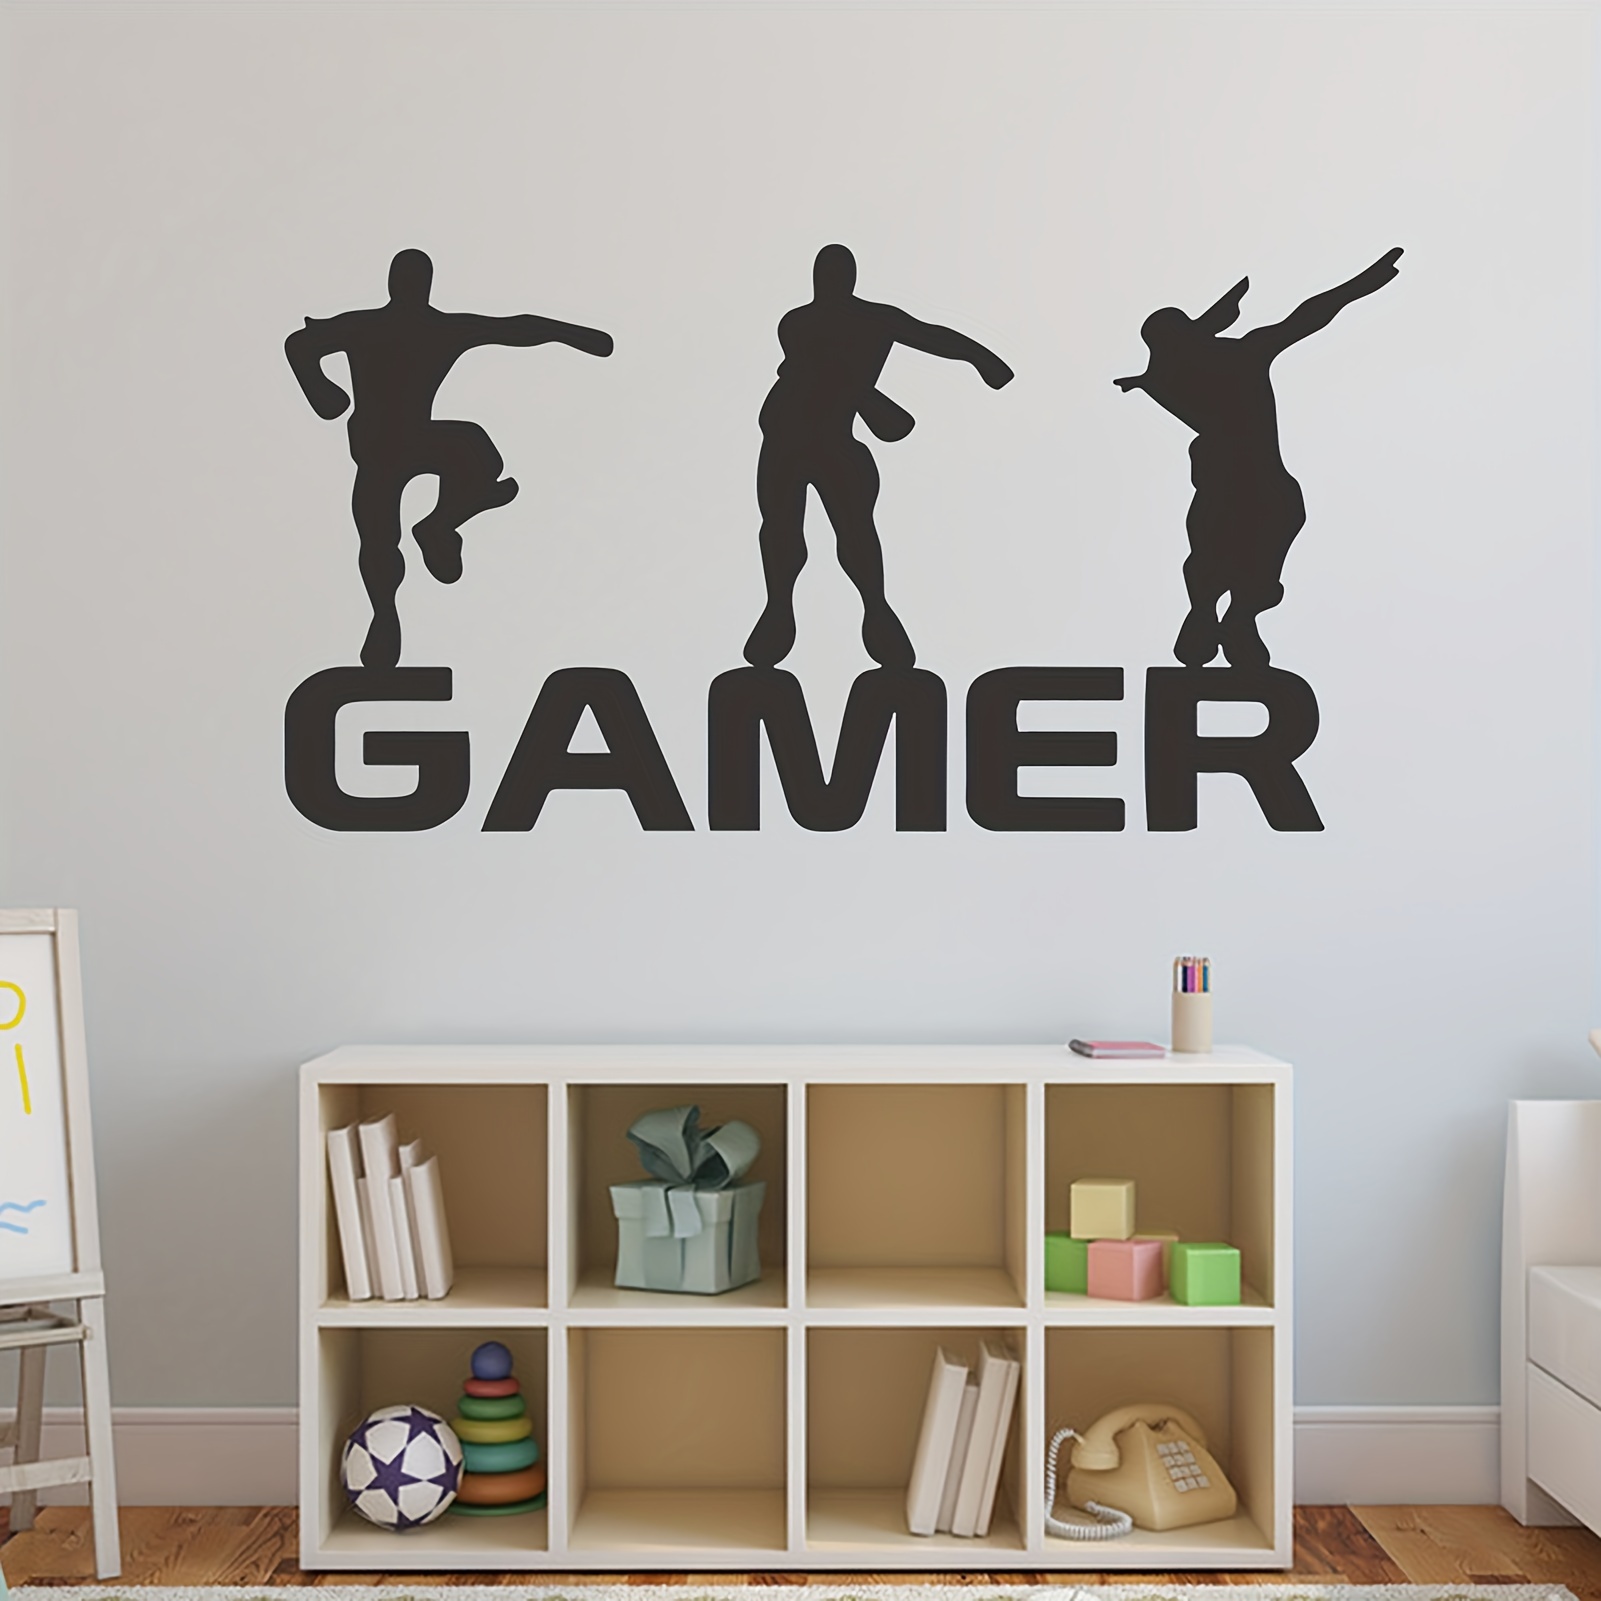 

A Creative Game Wall Sticker Measuring 11.42" X 22.05", Suitable For Families, Children, Living Rooms, Boys, Bedrooms, Game Rooms, And Wall Decorations.